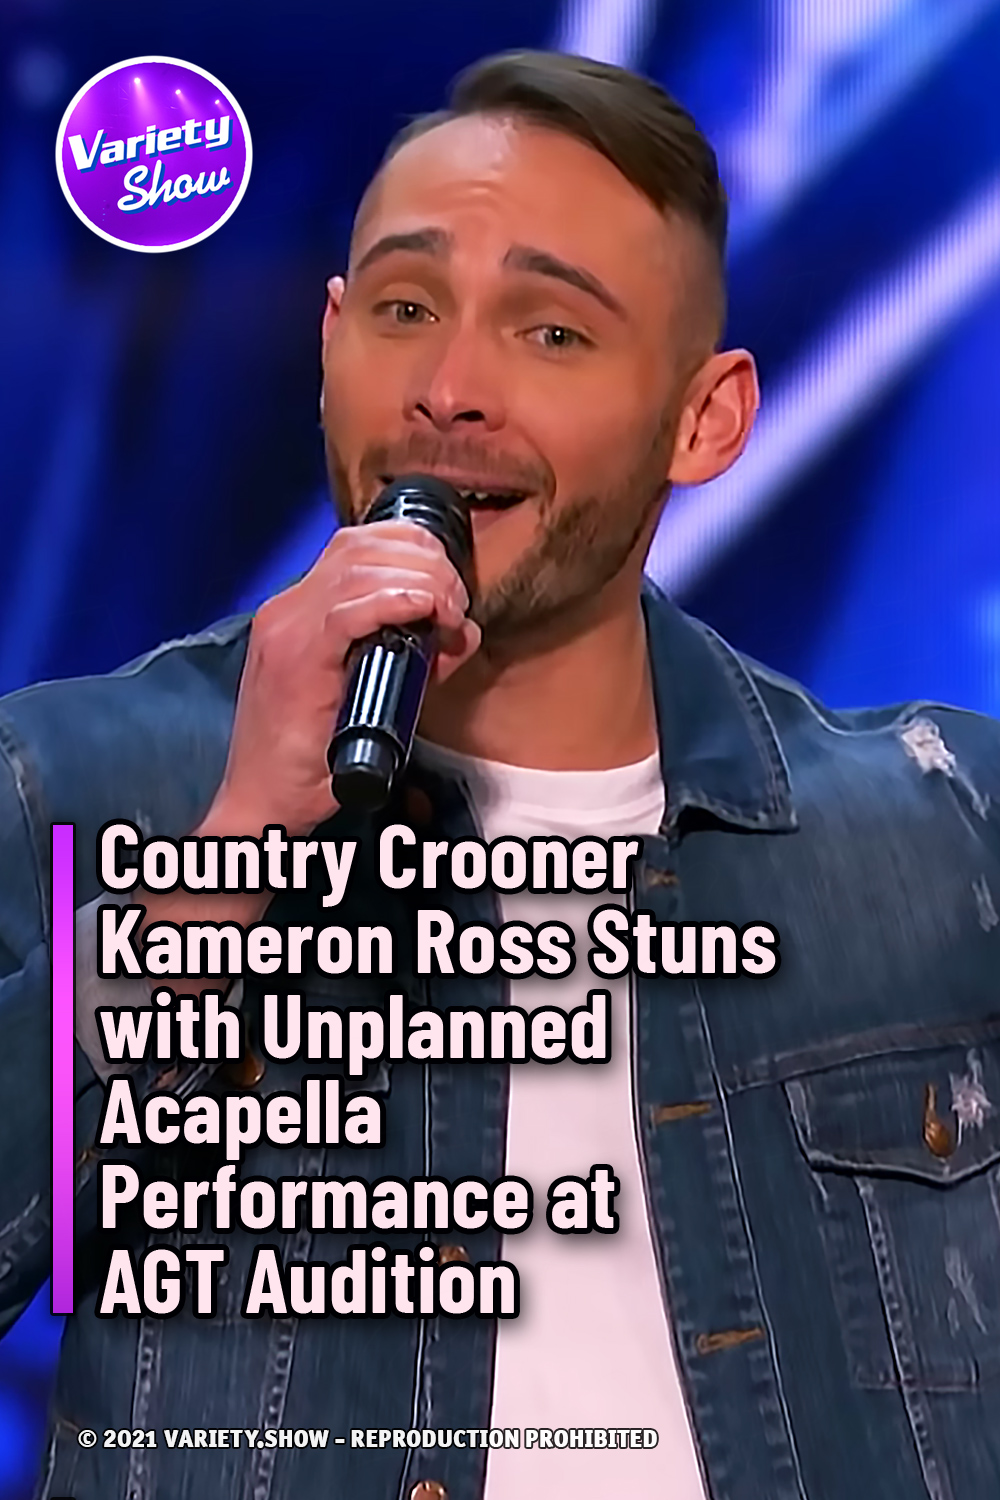 Country Crooner Kameron Ross Stuns with Unplanned Acapella Performance at AGT Audition